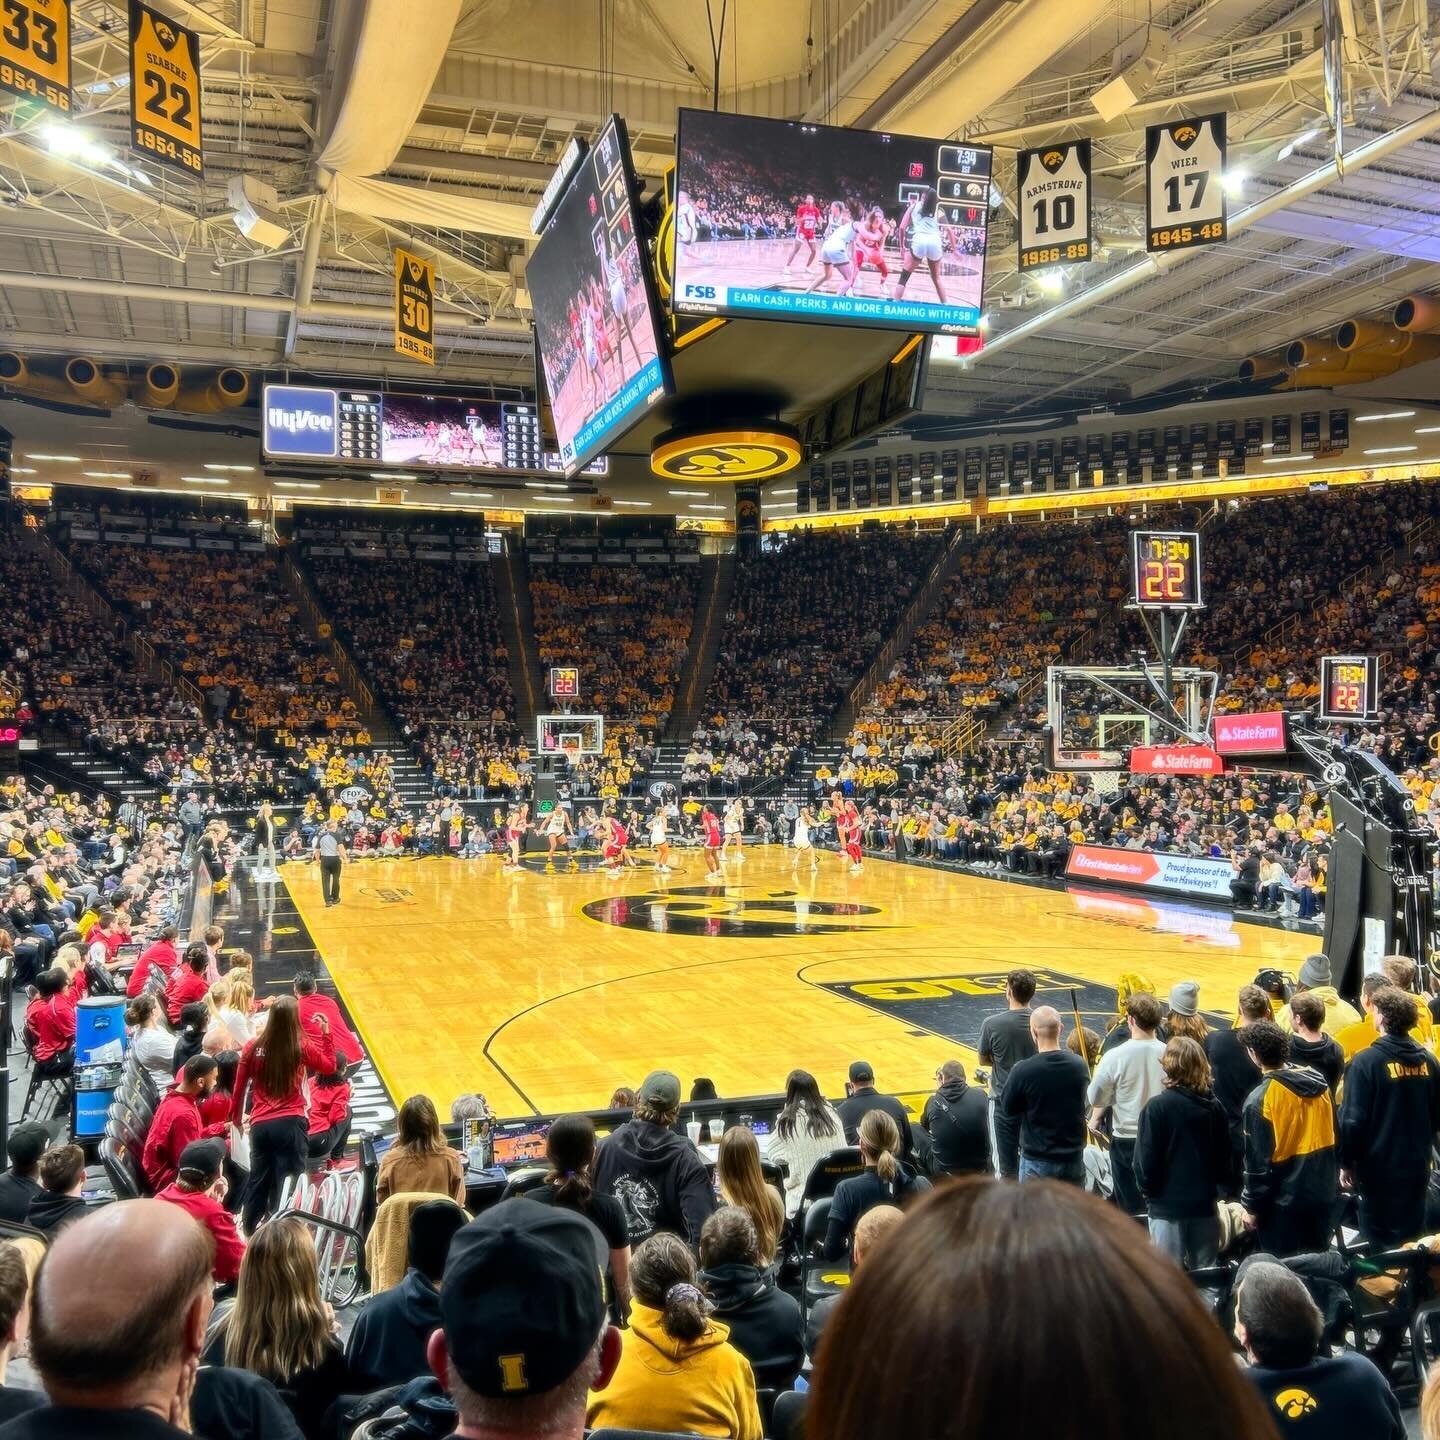 In January we:

Supported @iowawbb 🖤
Survived a variety of road conditions!
Stayed inside 
Played trivia with friends 🏆

Lots going on behind the scenes, can&rsquo;t wait to update you soon 💕